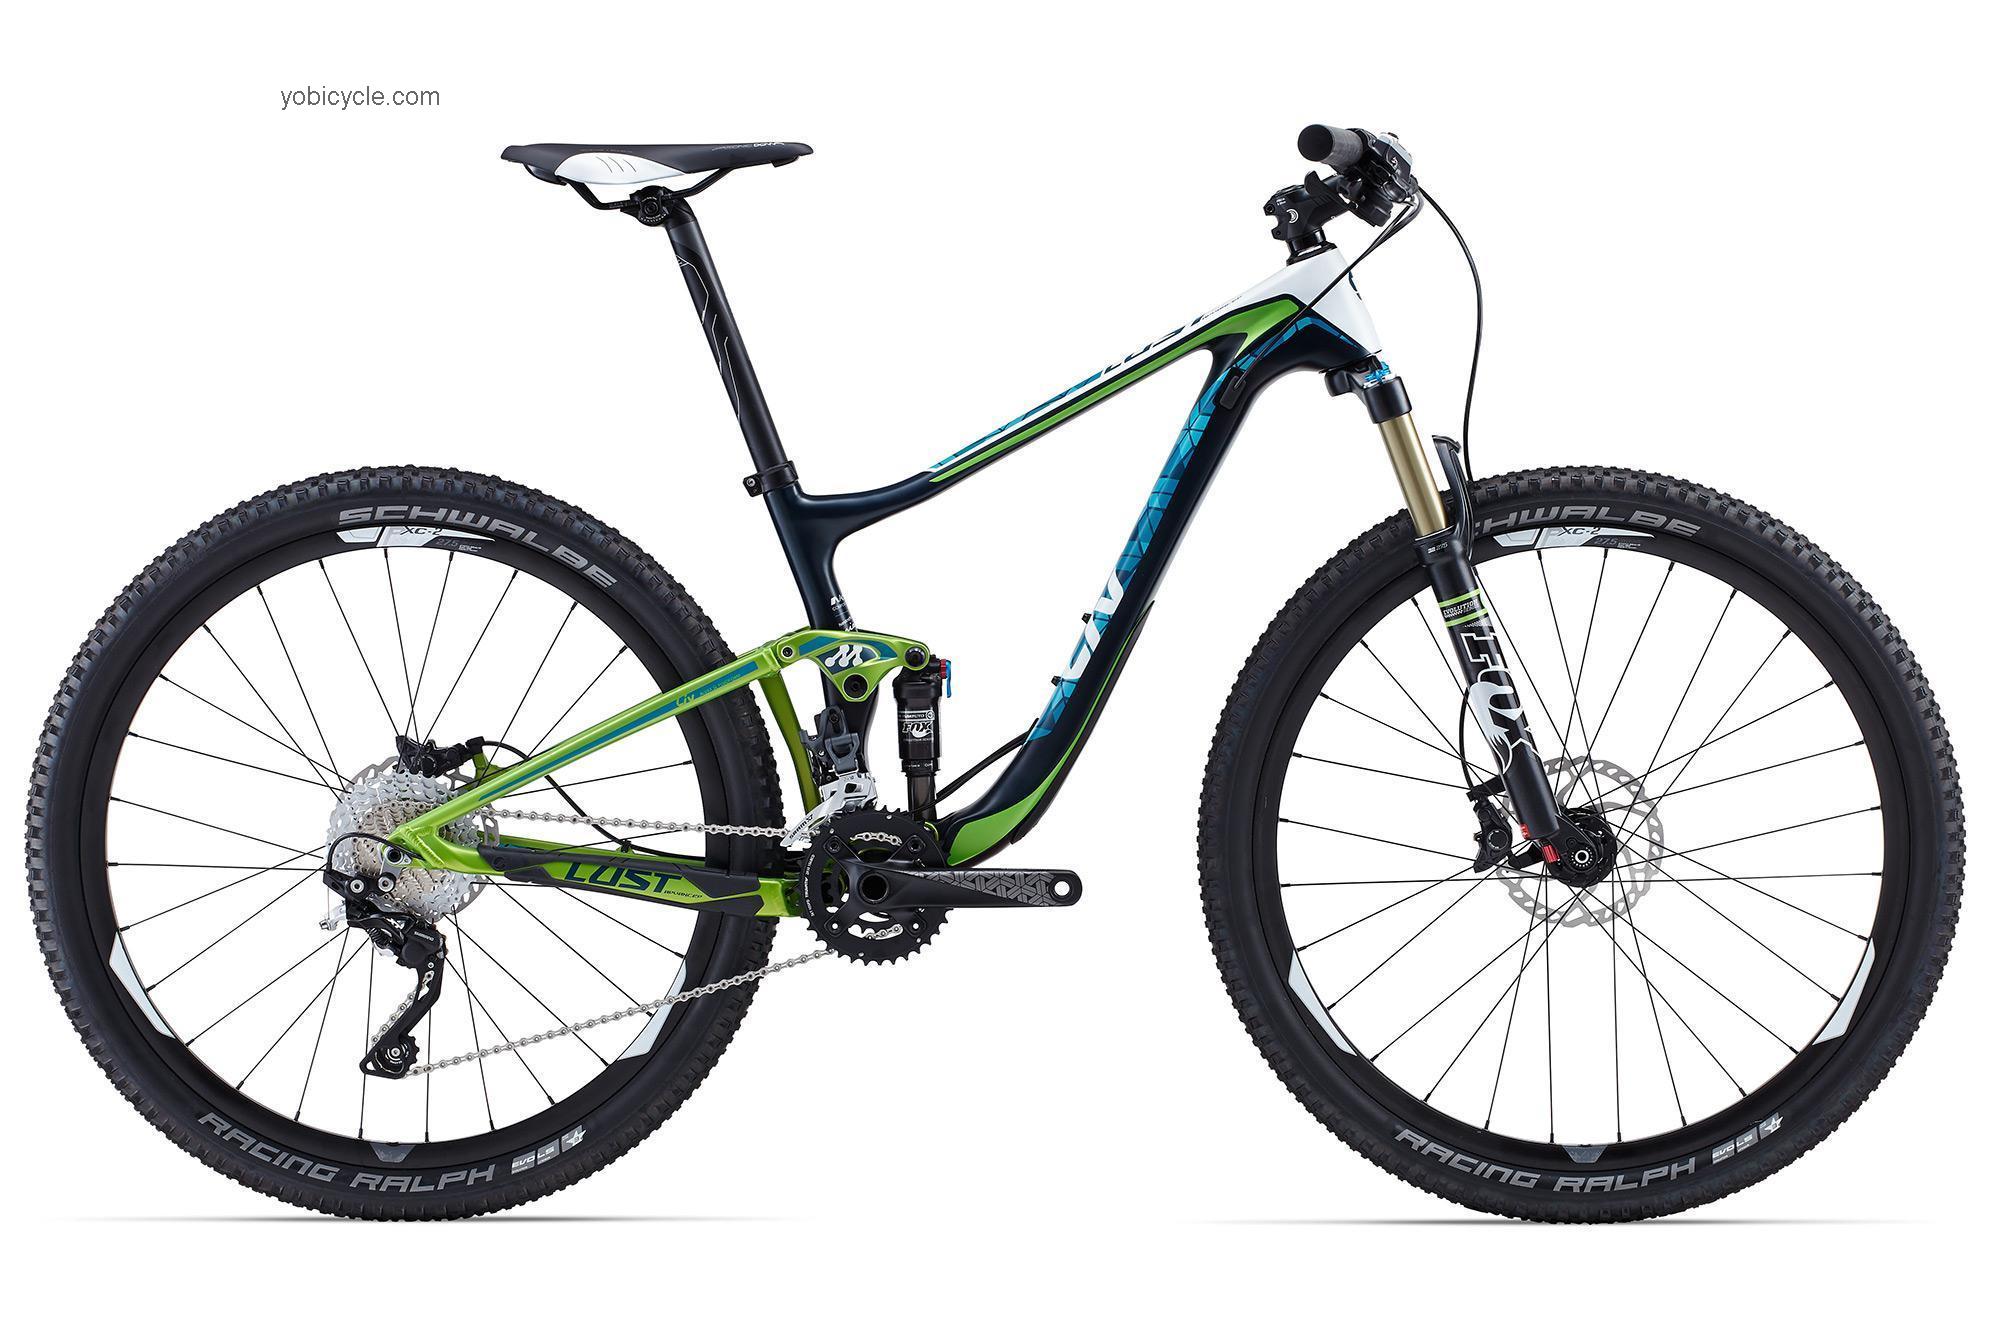 Giant Lust Advanced 2 2015 comparison online with competitors